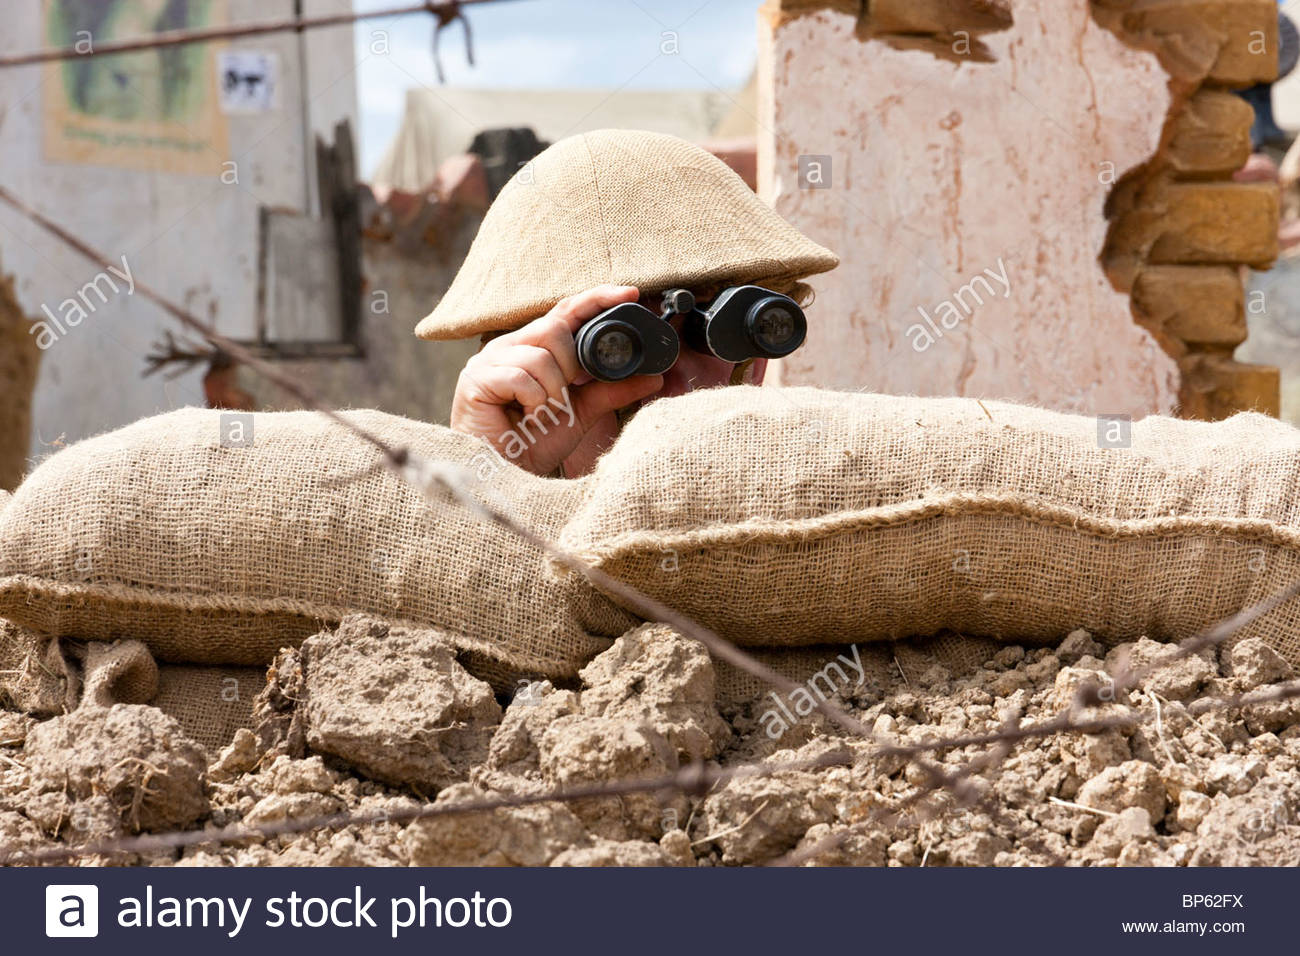 re-enactment-british-office-in-trench-looking-over-the-top-through-BP62FX.jpg